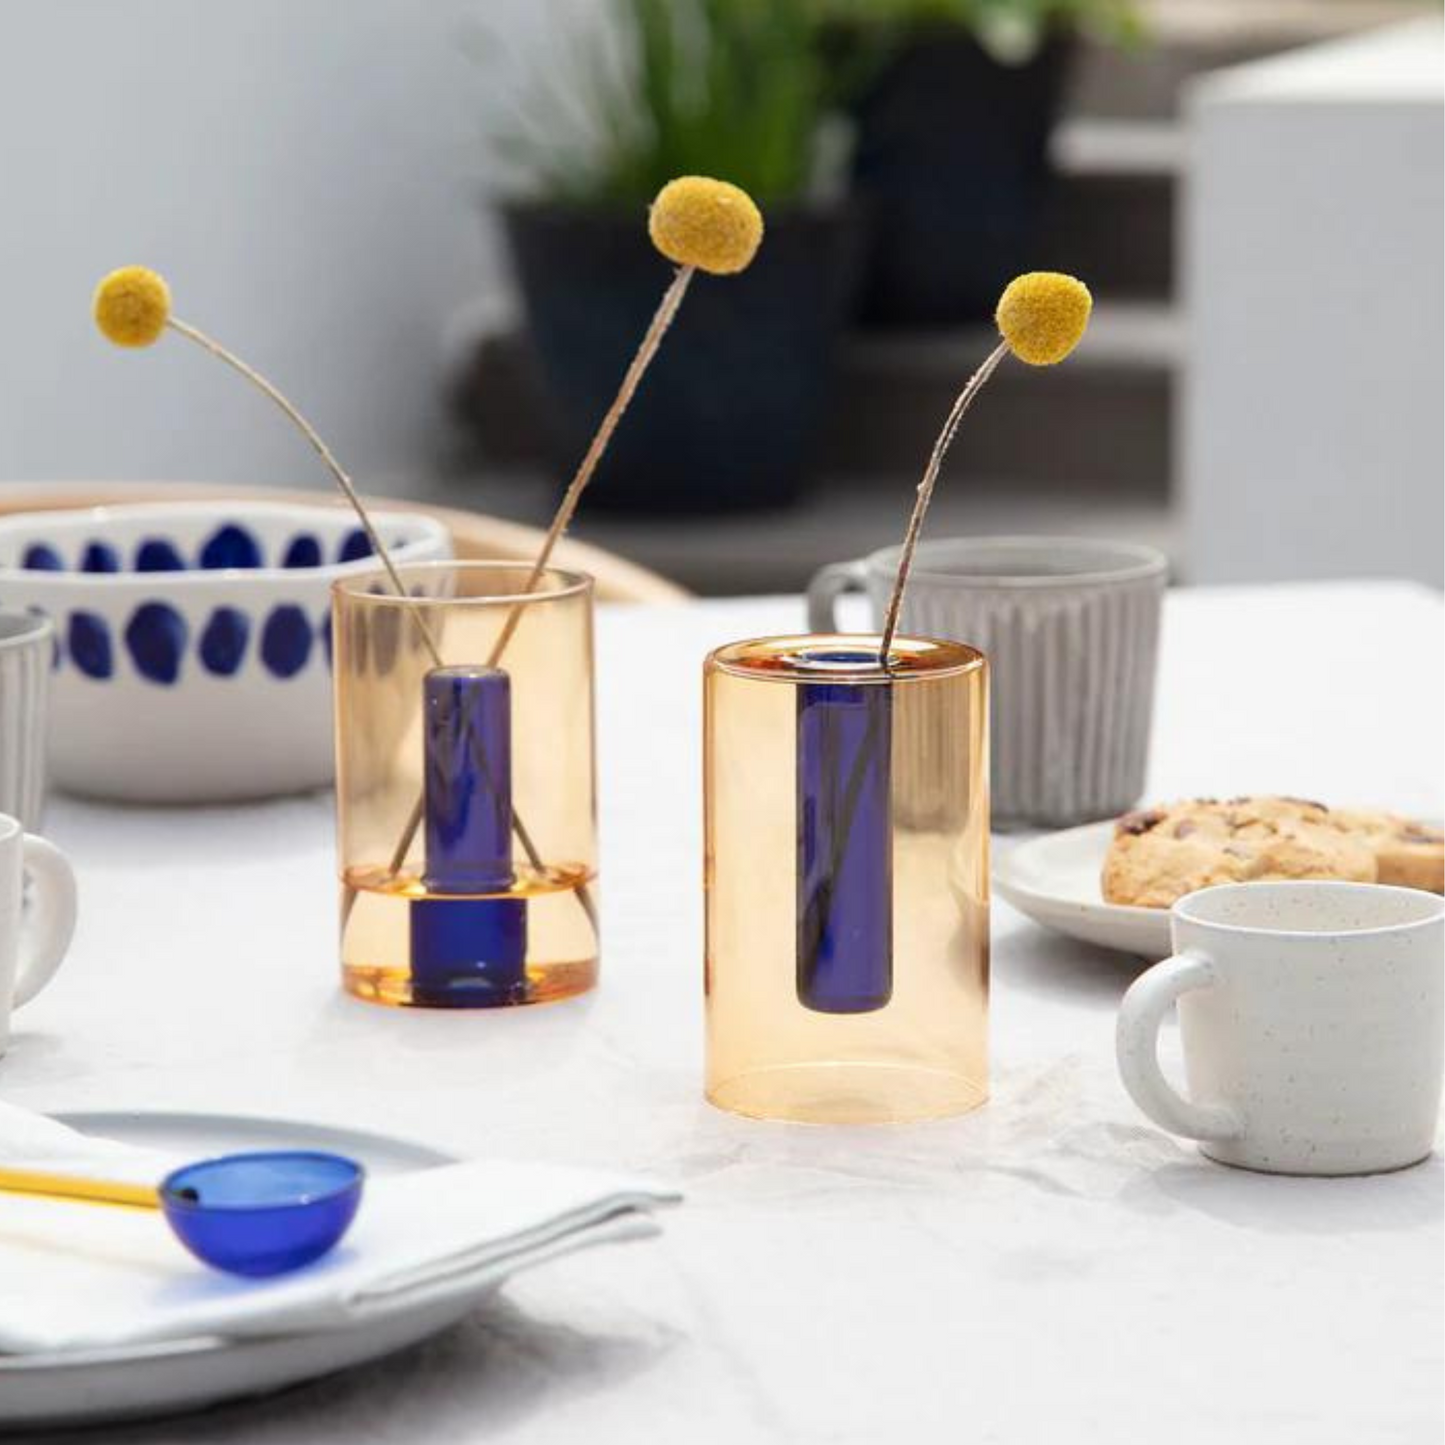 reversible glass vase in cobalt and peach on a table setting with mugs, bowls and spoons.